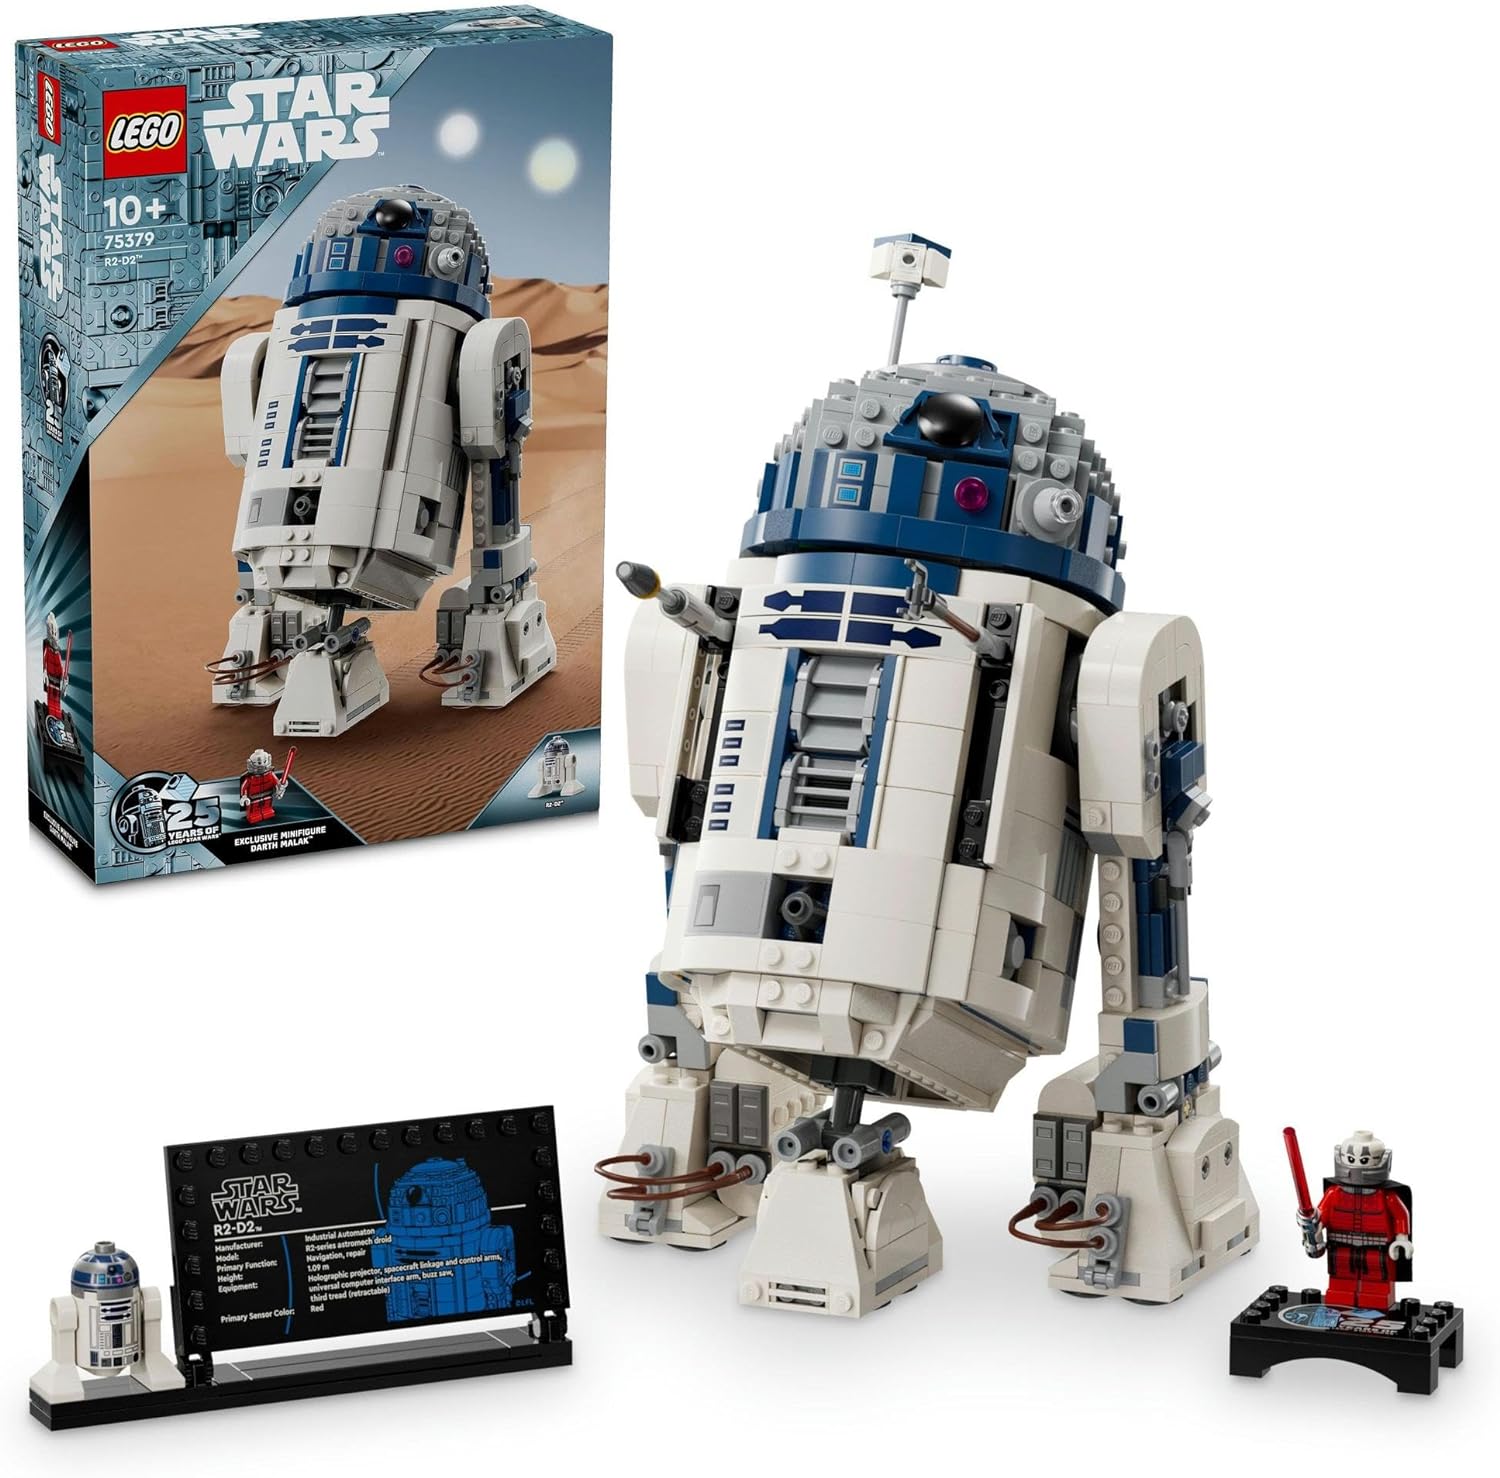 LEGO® Star Wars™ R2-D2™ 75379 Collectible Brick-Built Toy Droid Figure for Display and Creative Play - Venus Trendy Fashion Online